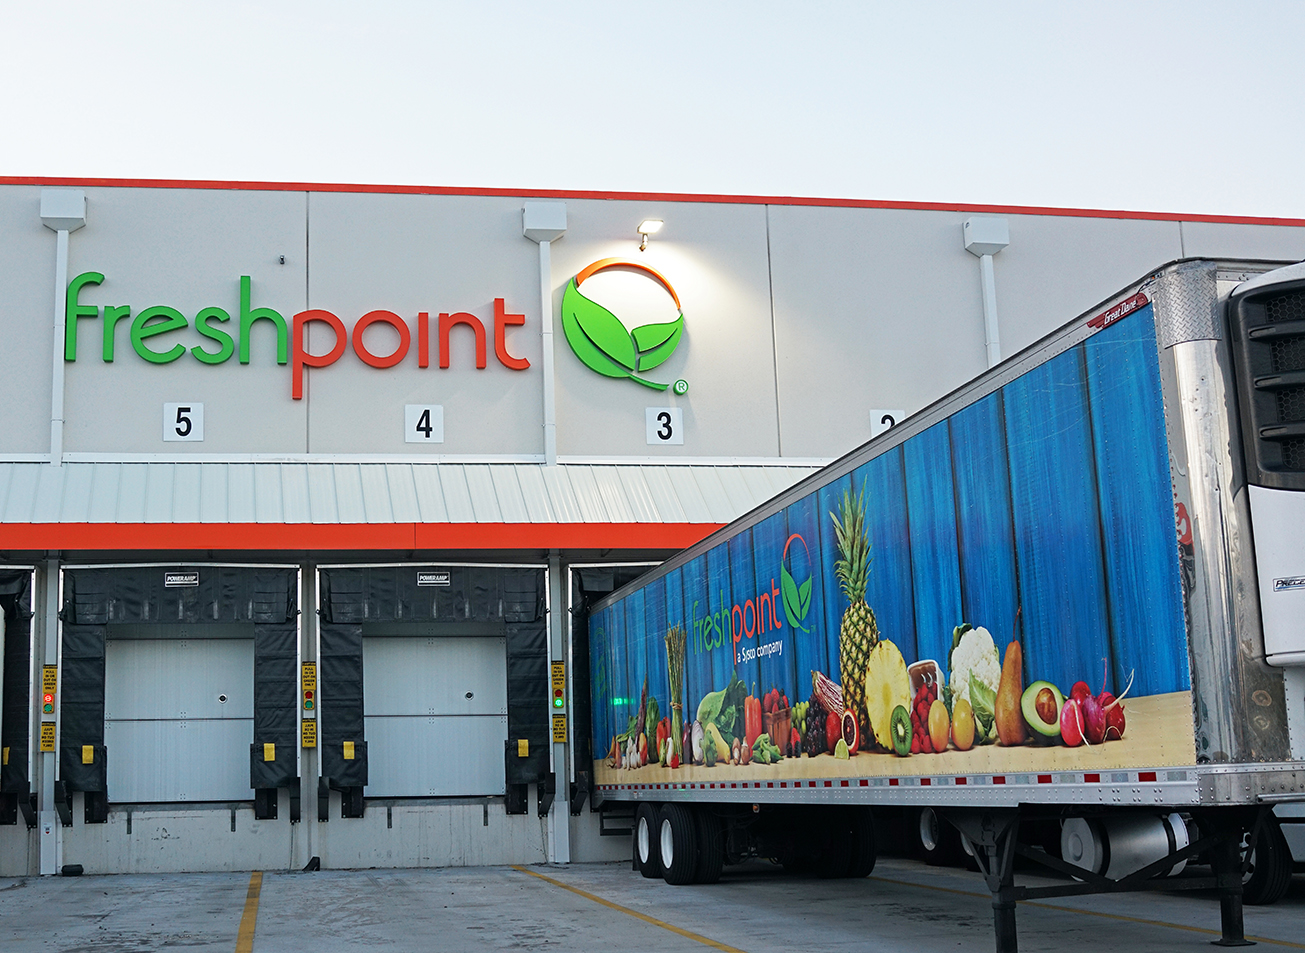 FreshFry going global in deal with Sysco - Louisville Business First